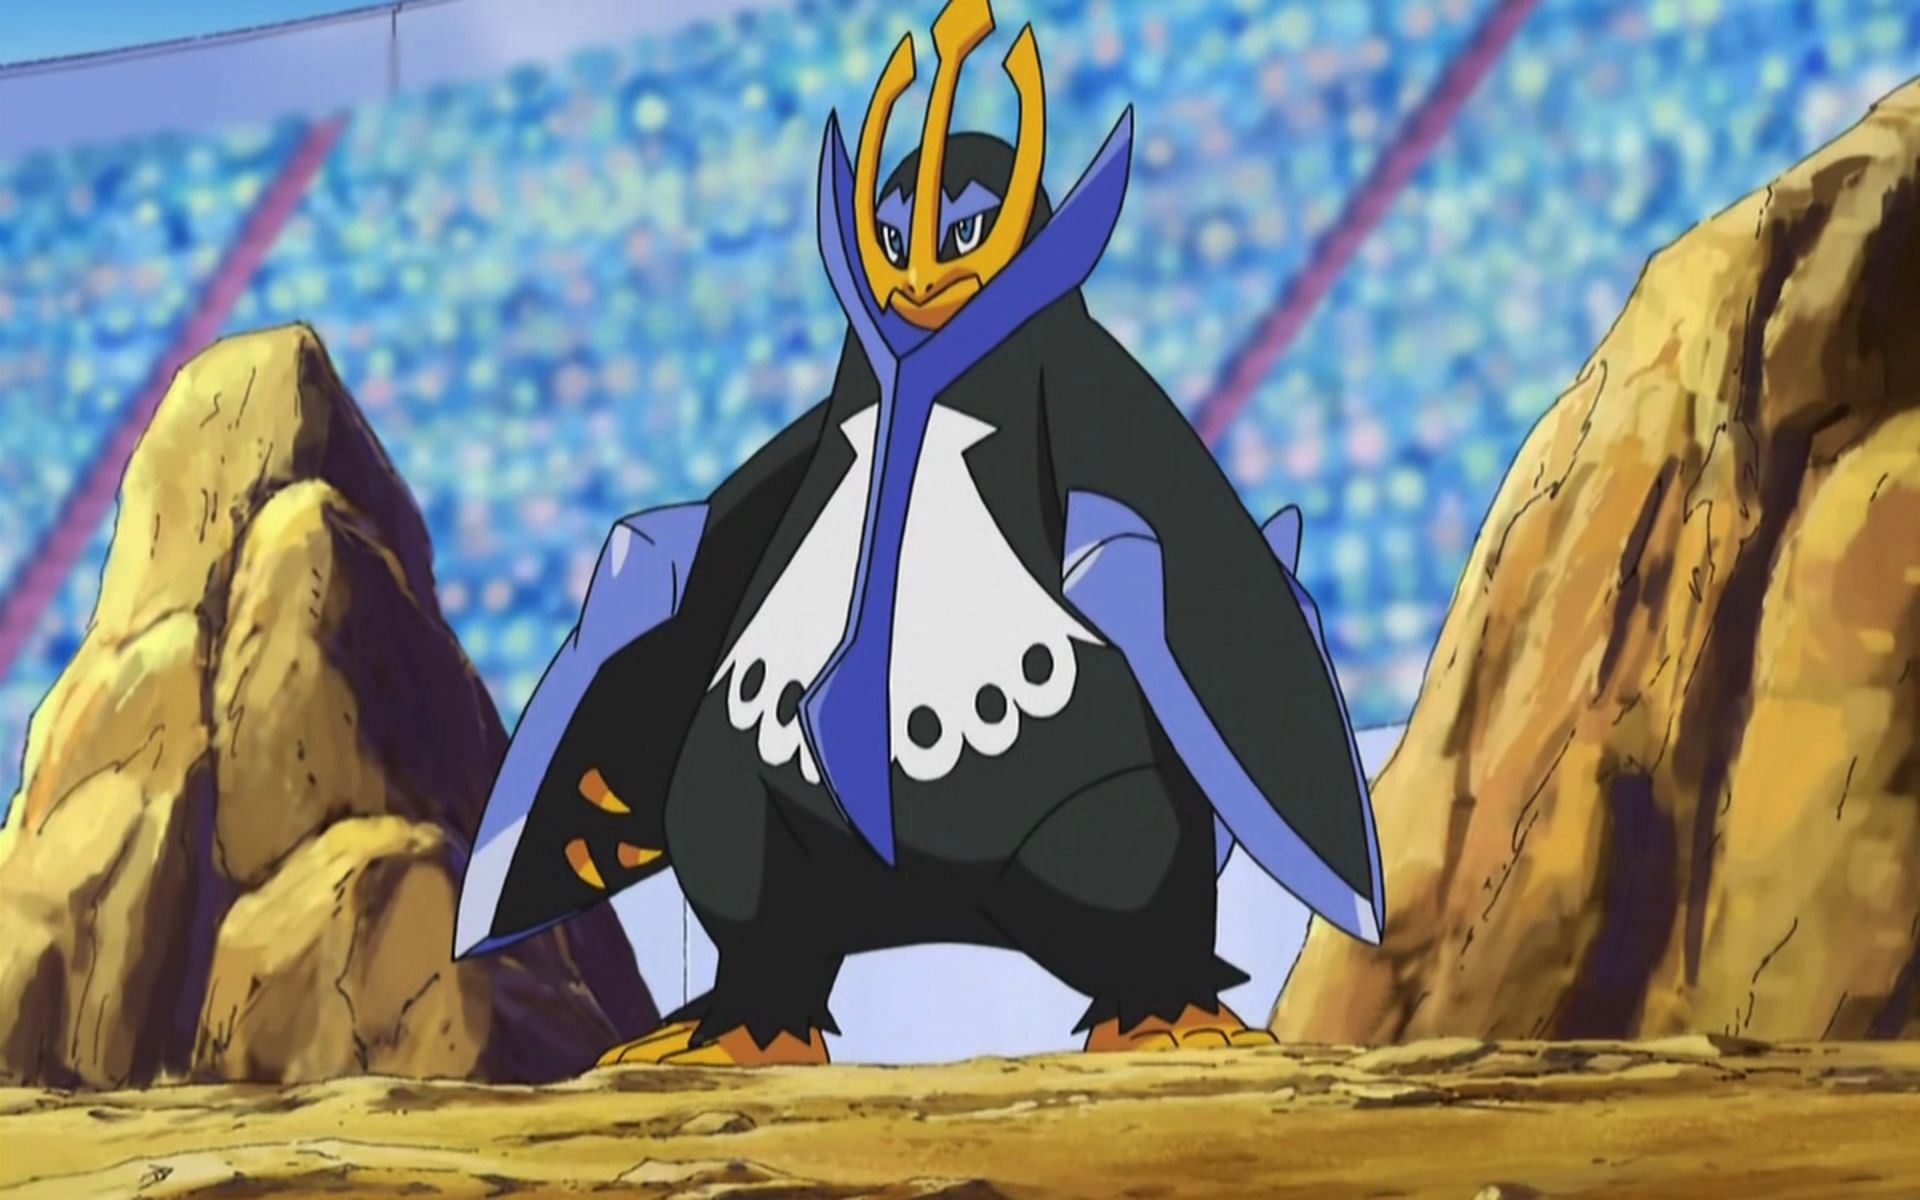 Empoleon gets access to strong moves like Hydro Pump and Metal Claw (Image via The Pokemon Company)